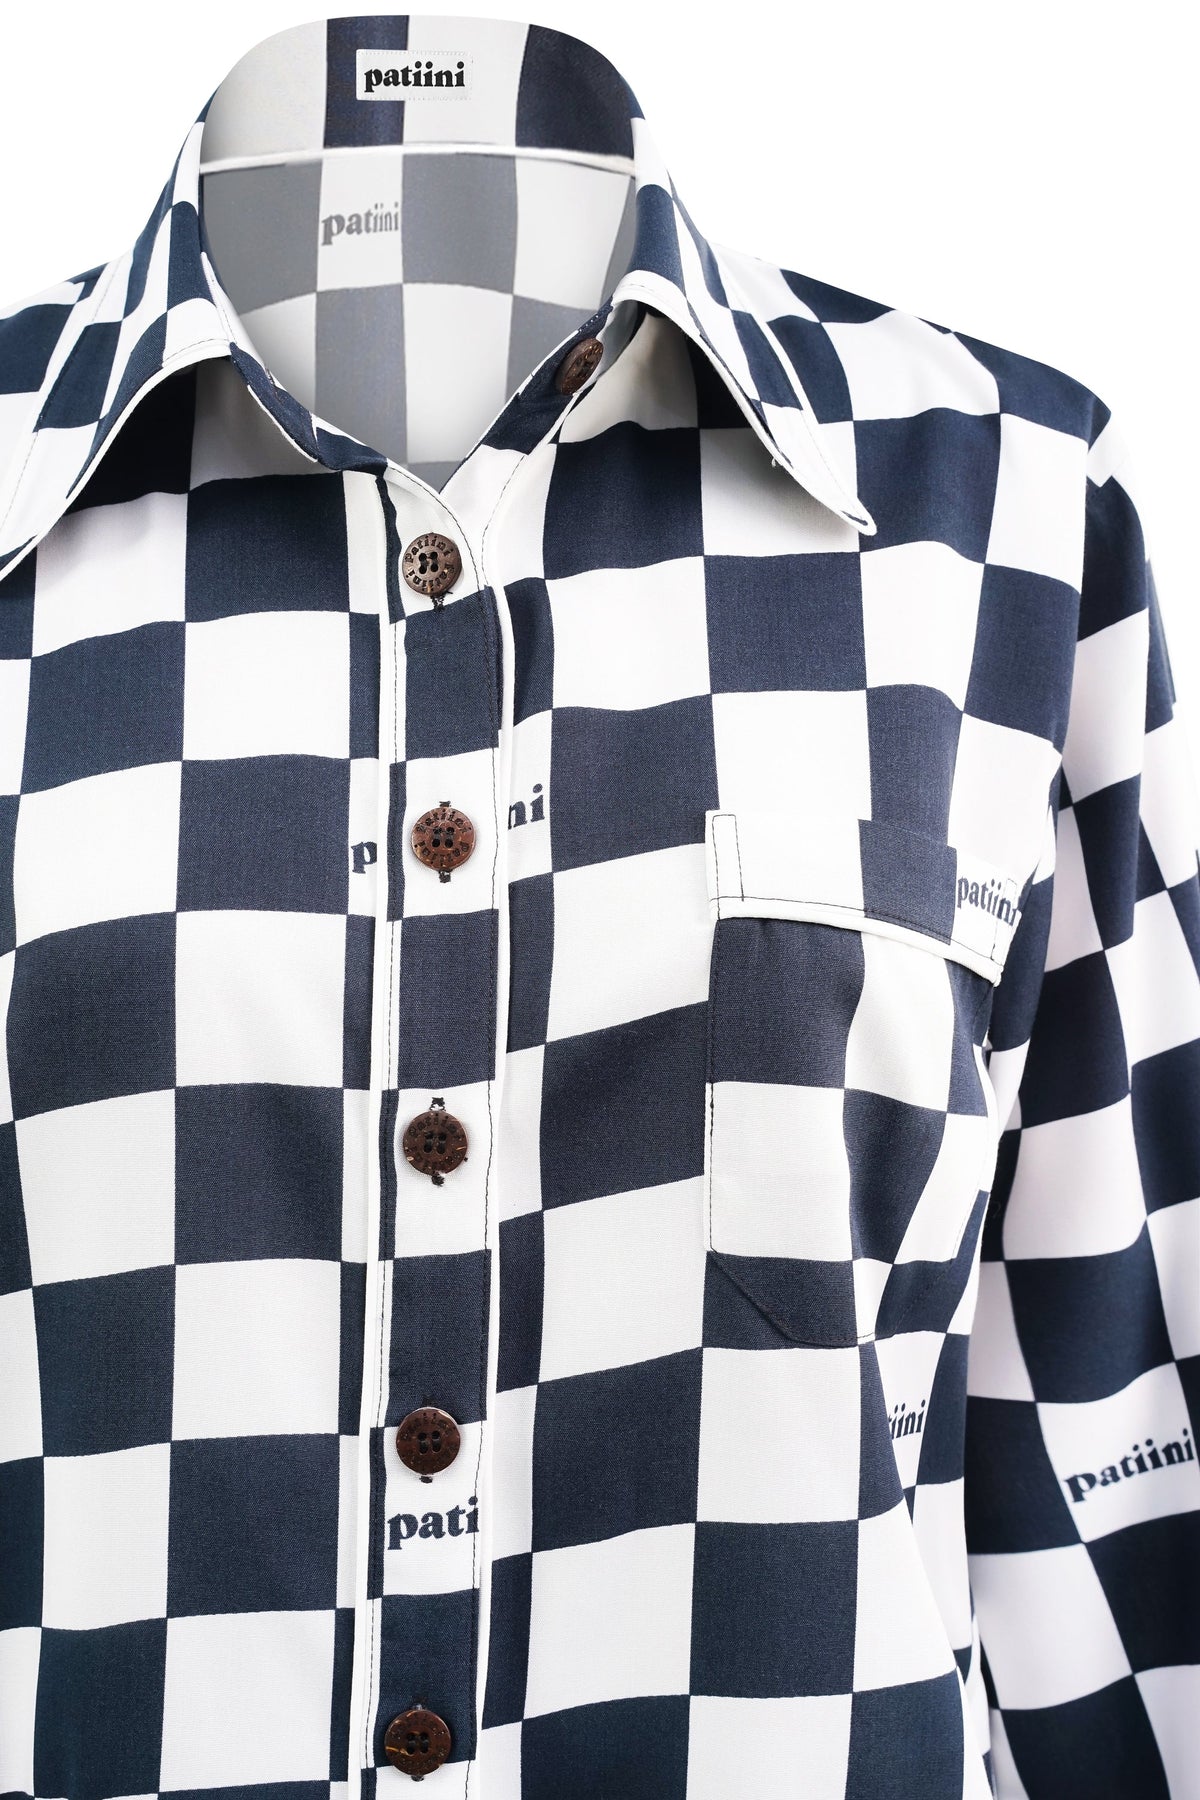 Close up of black and white checkered shirt with coconut shell buttons.Woman with her back turned wears a black and white checkered pajama set.